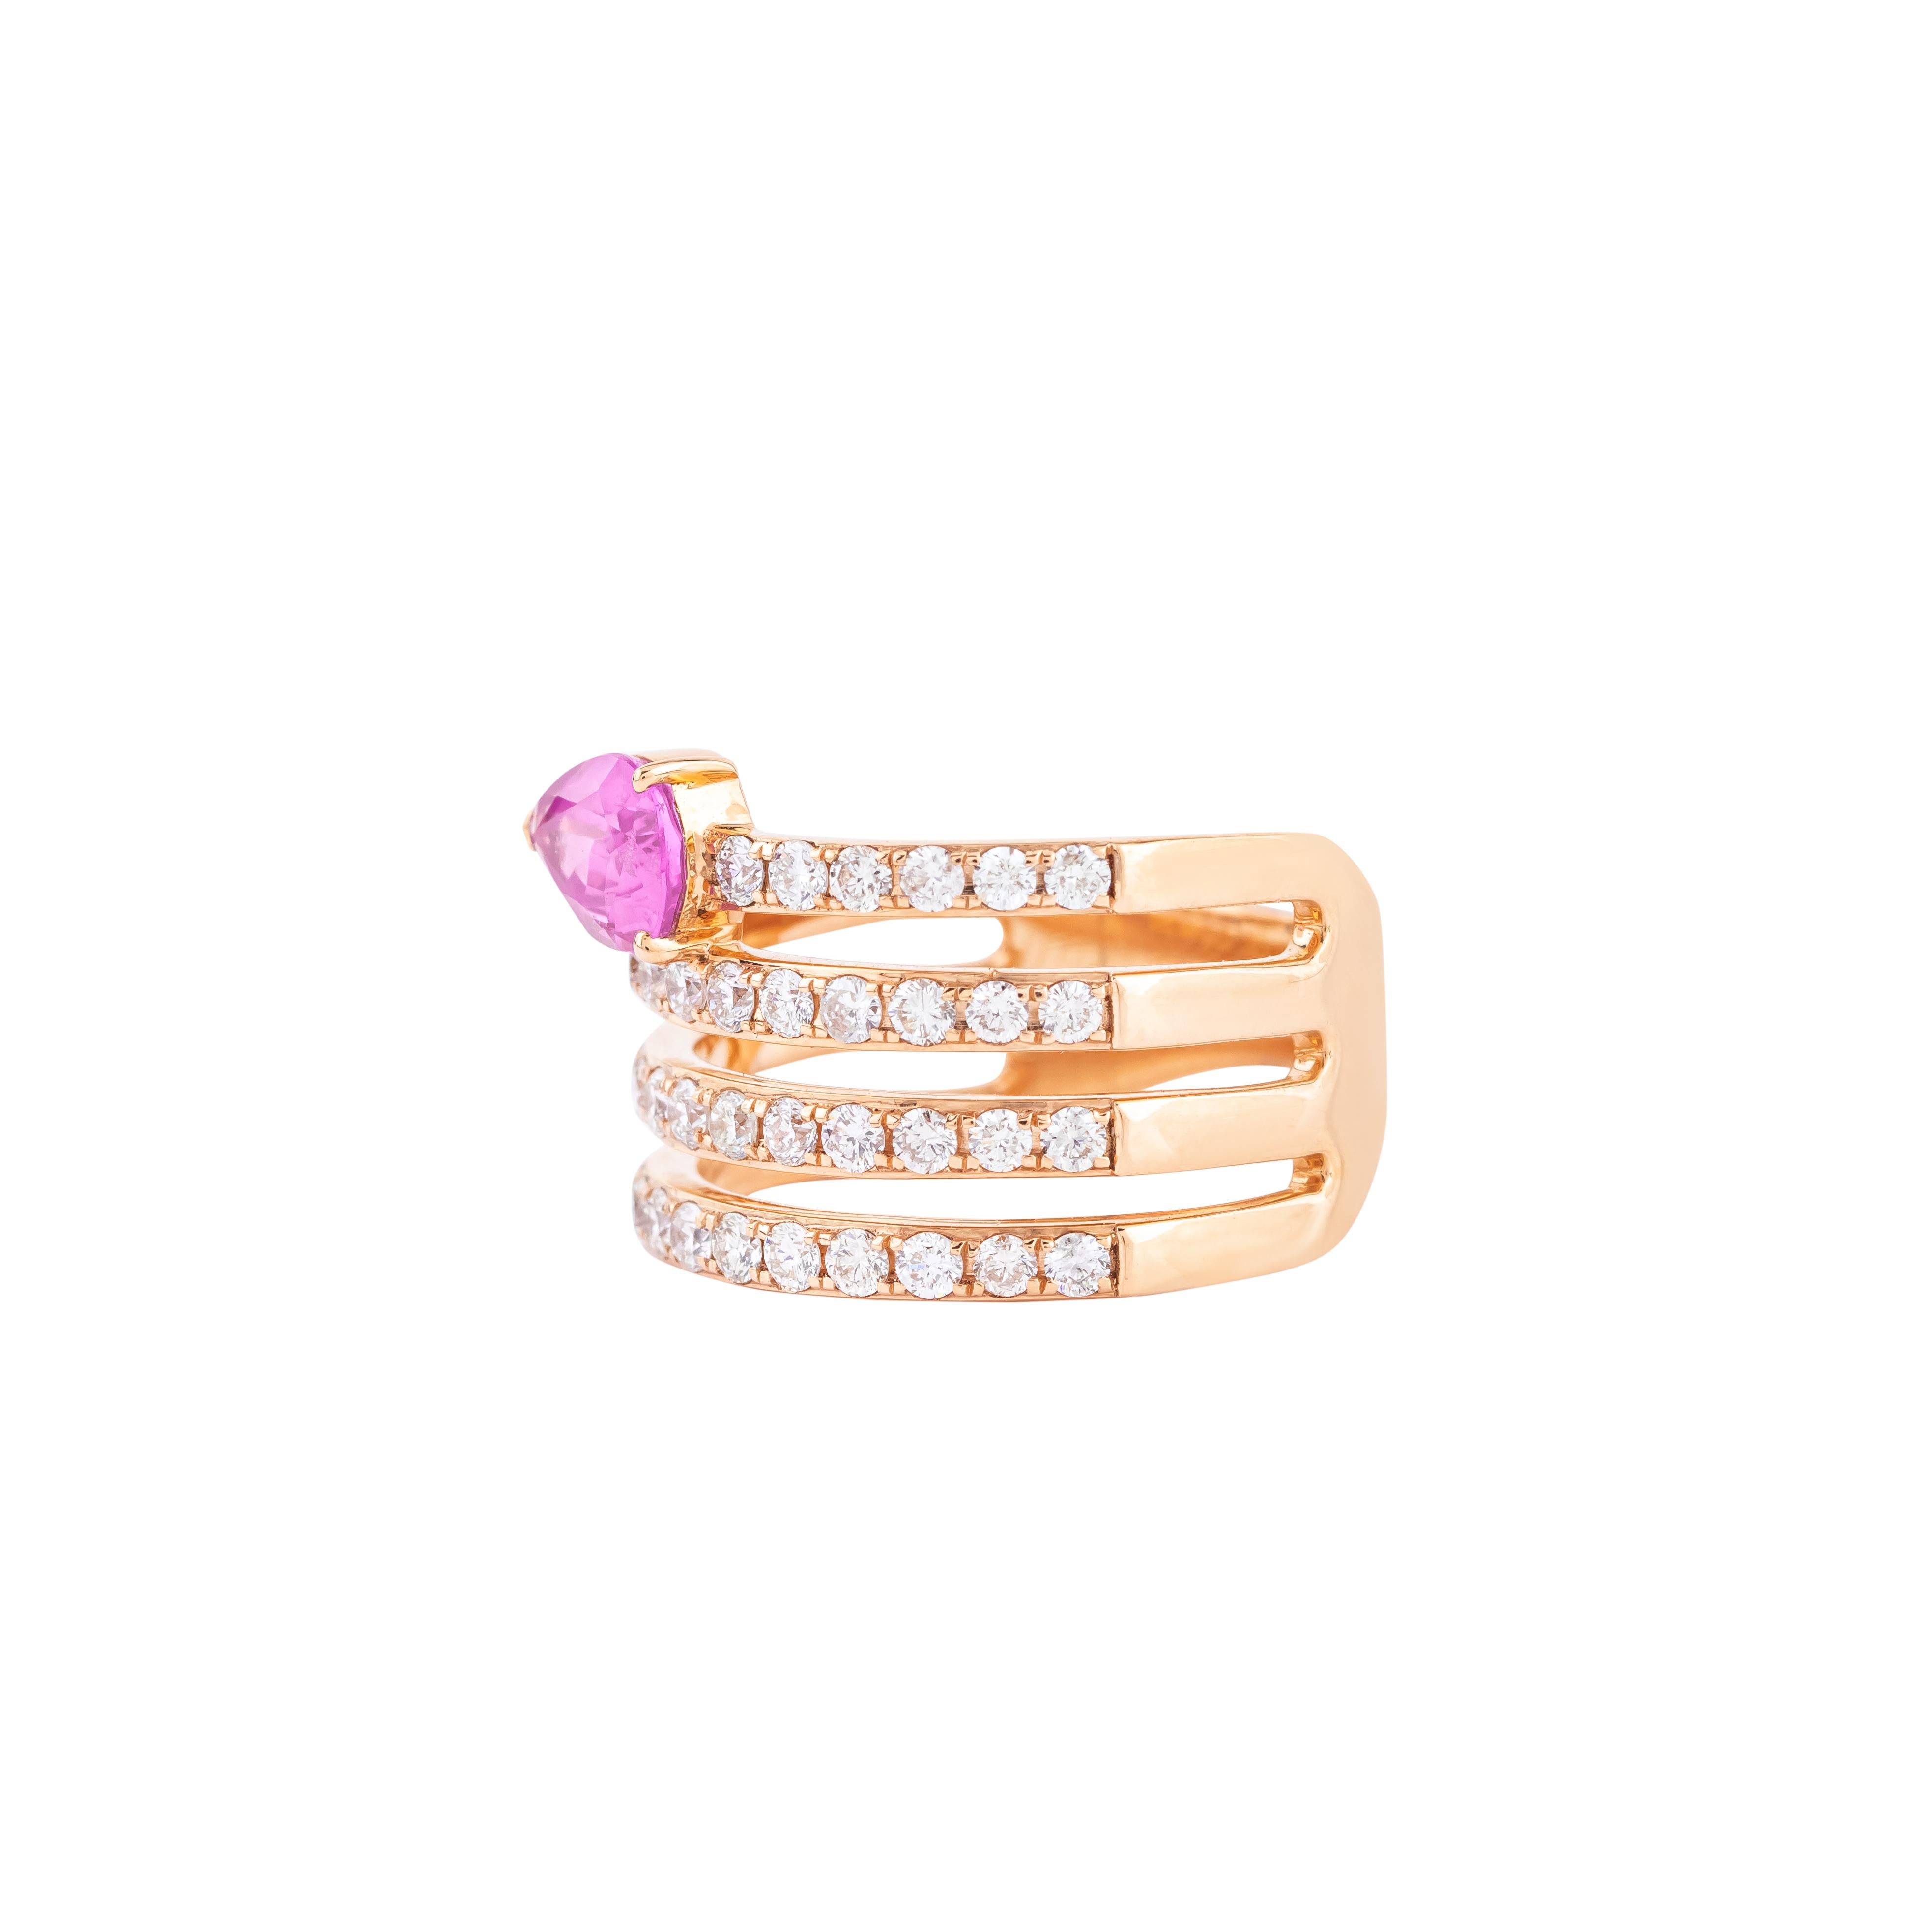 Immerse yourself in the world of luxury with our 18 Karat Gold 2.24 Carat Diamond and Pink Sapphire Cocktail Ring – a captivating blend of sophistication and glamour. Each ring is meticulously crafted and curated, reflecting our commitment to